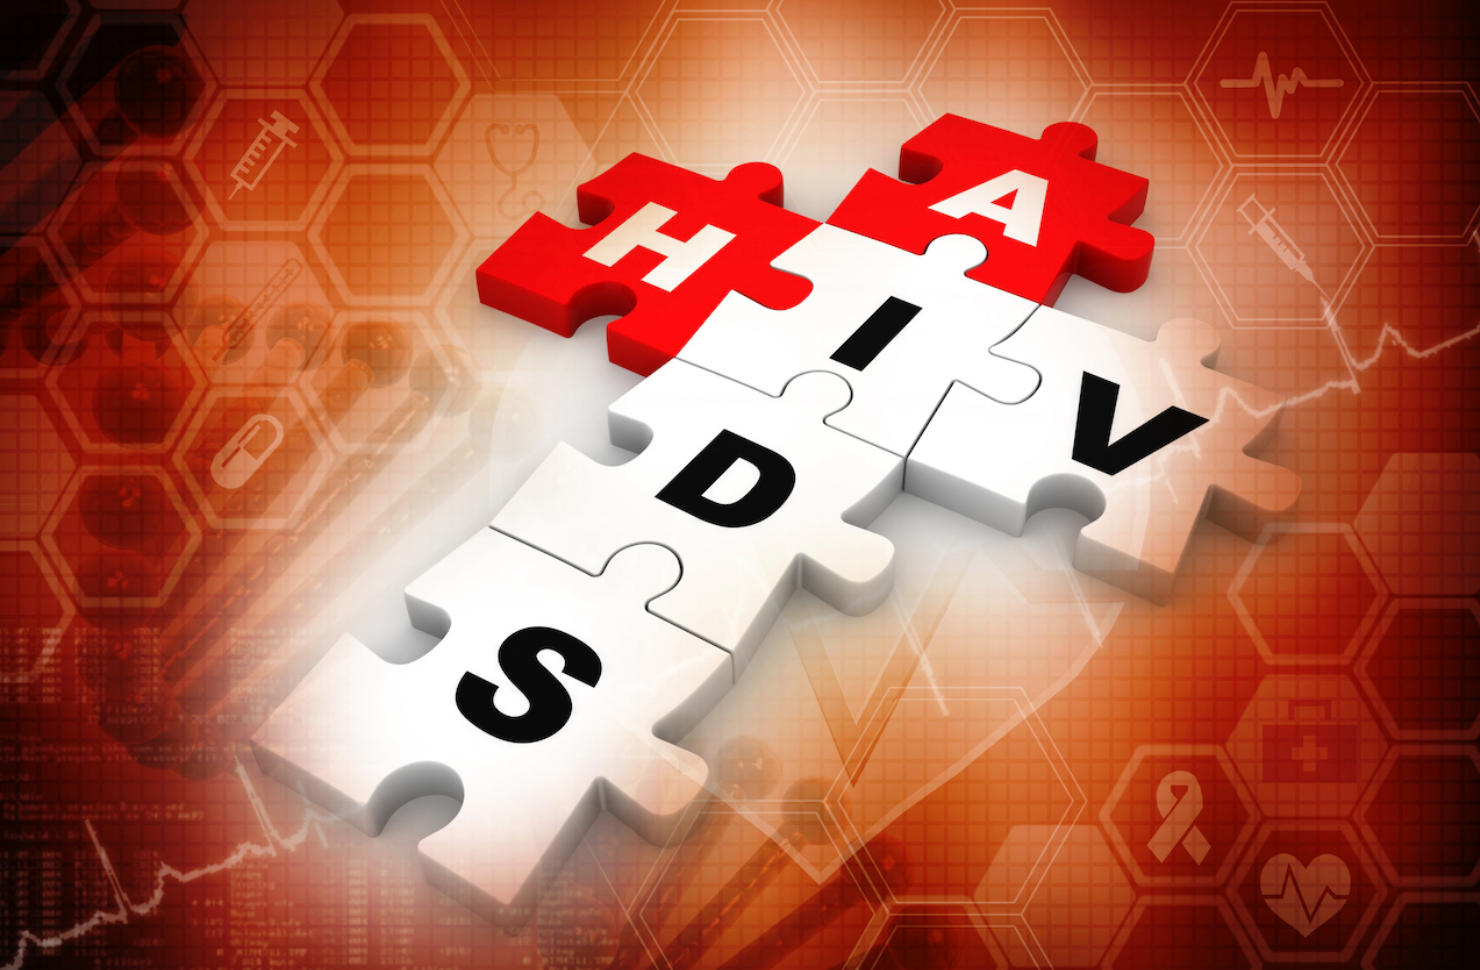 Clinical Overview: Cabotegravir (Apretude) for HIV Pre-Exposure Prophylaxis